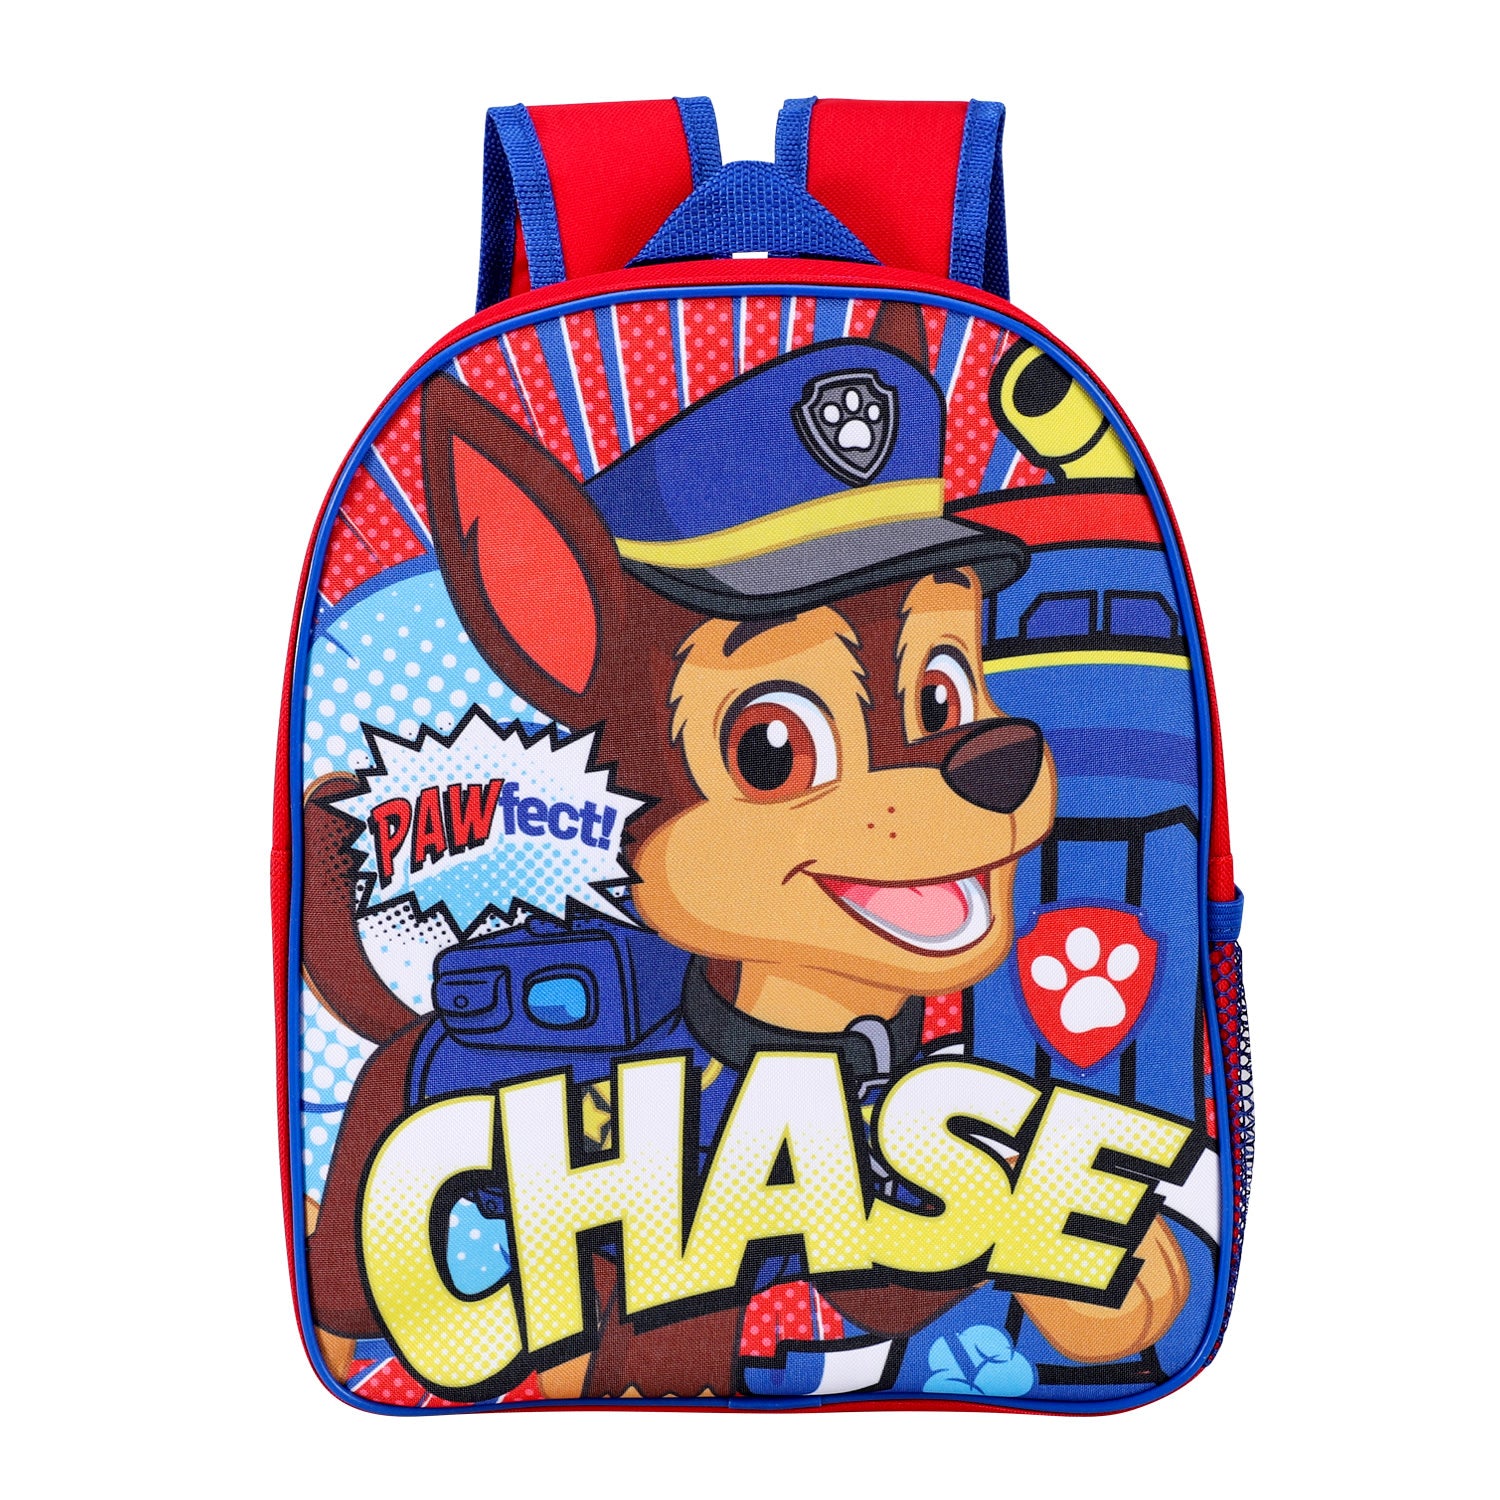 Paw Patrol 'Chase' PAWfect Canvas Backpack